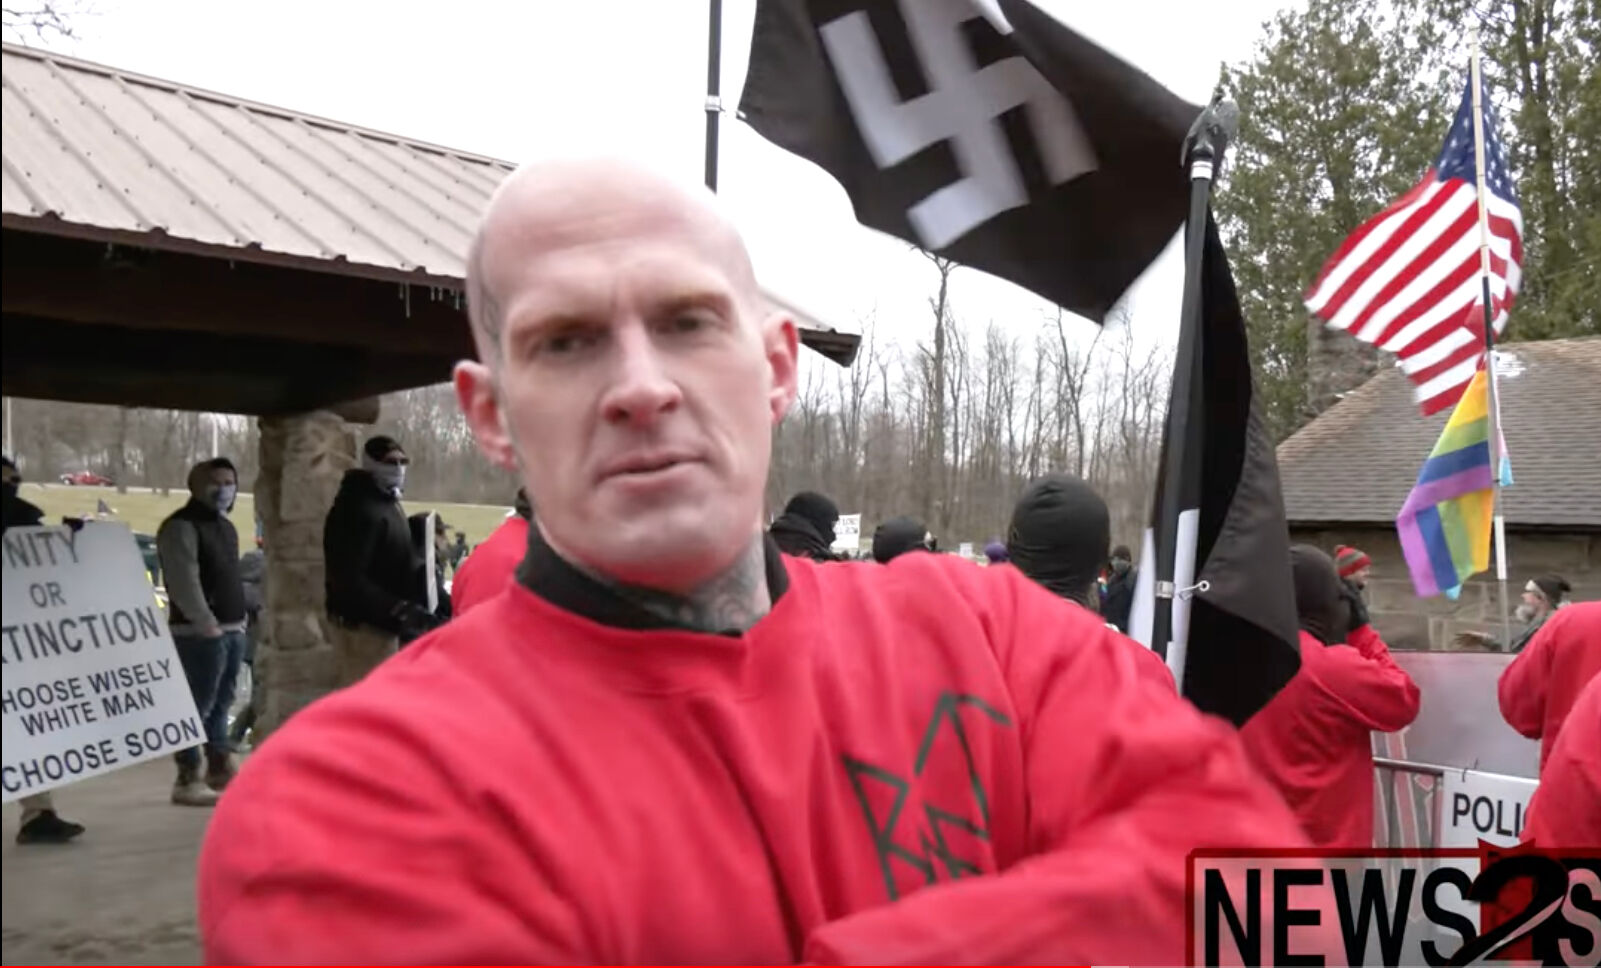 A bald white man in a red shirt stands near a park pavilion with a black Swastika flag flying behind him.